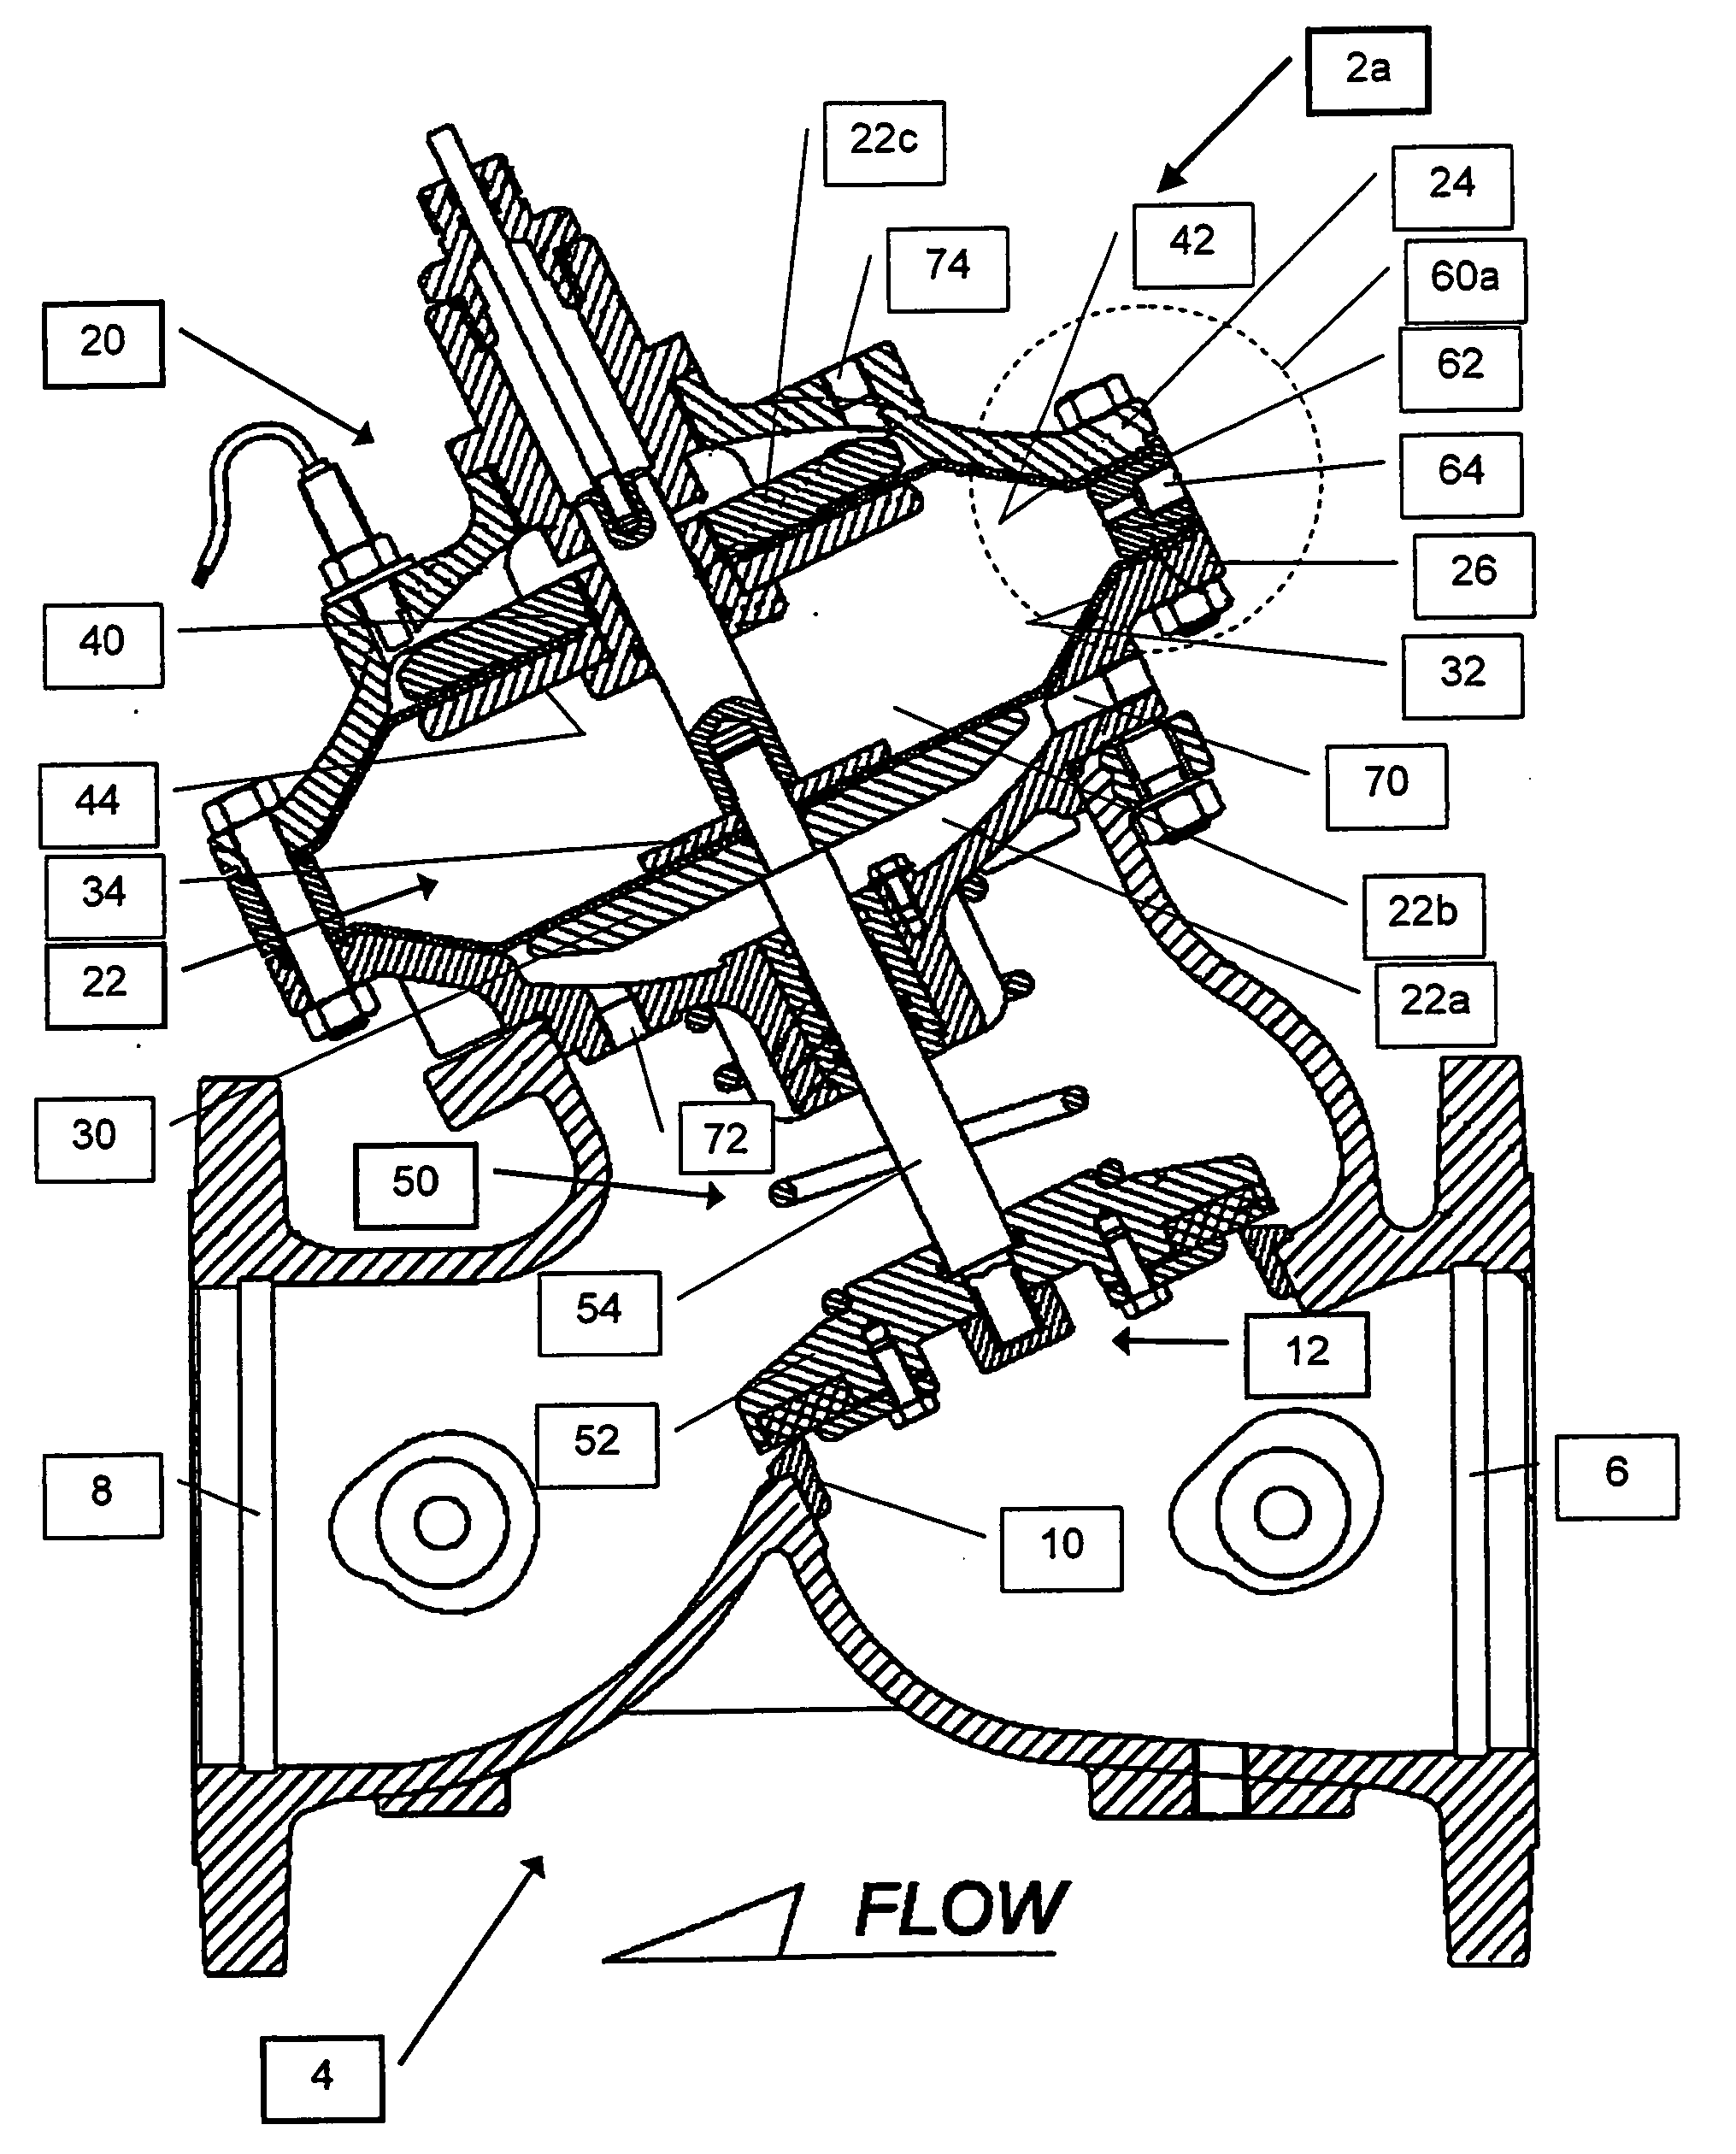 Hydraulic control valve with integrated dual actuators